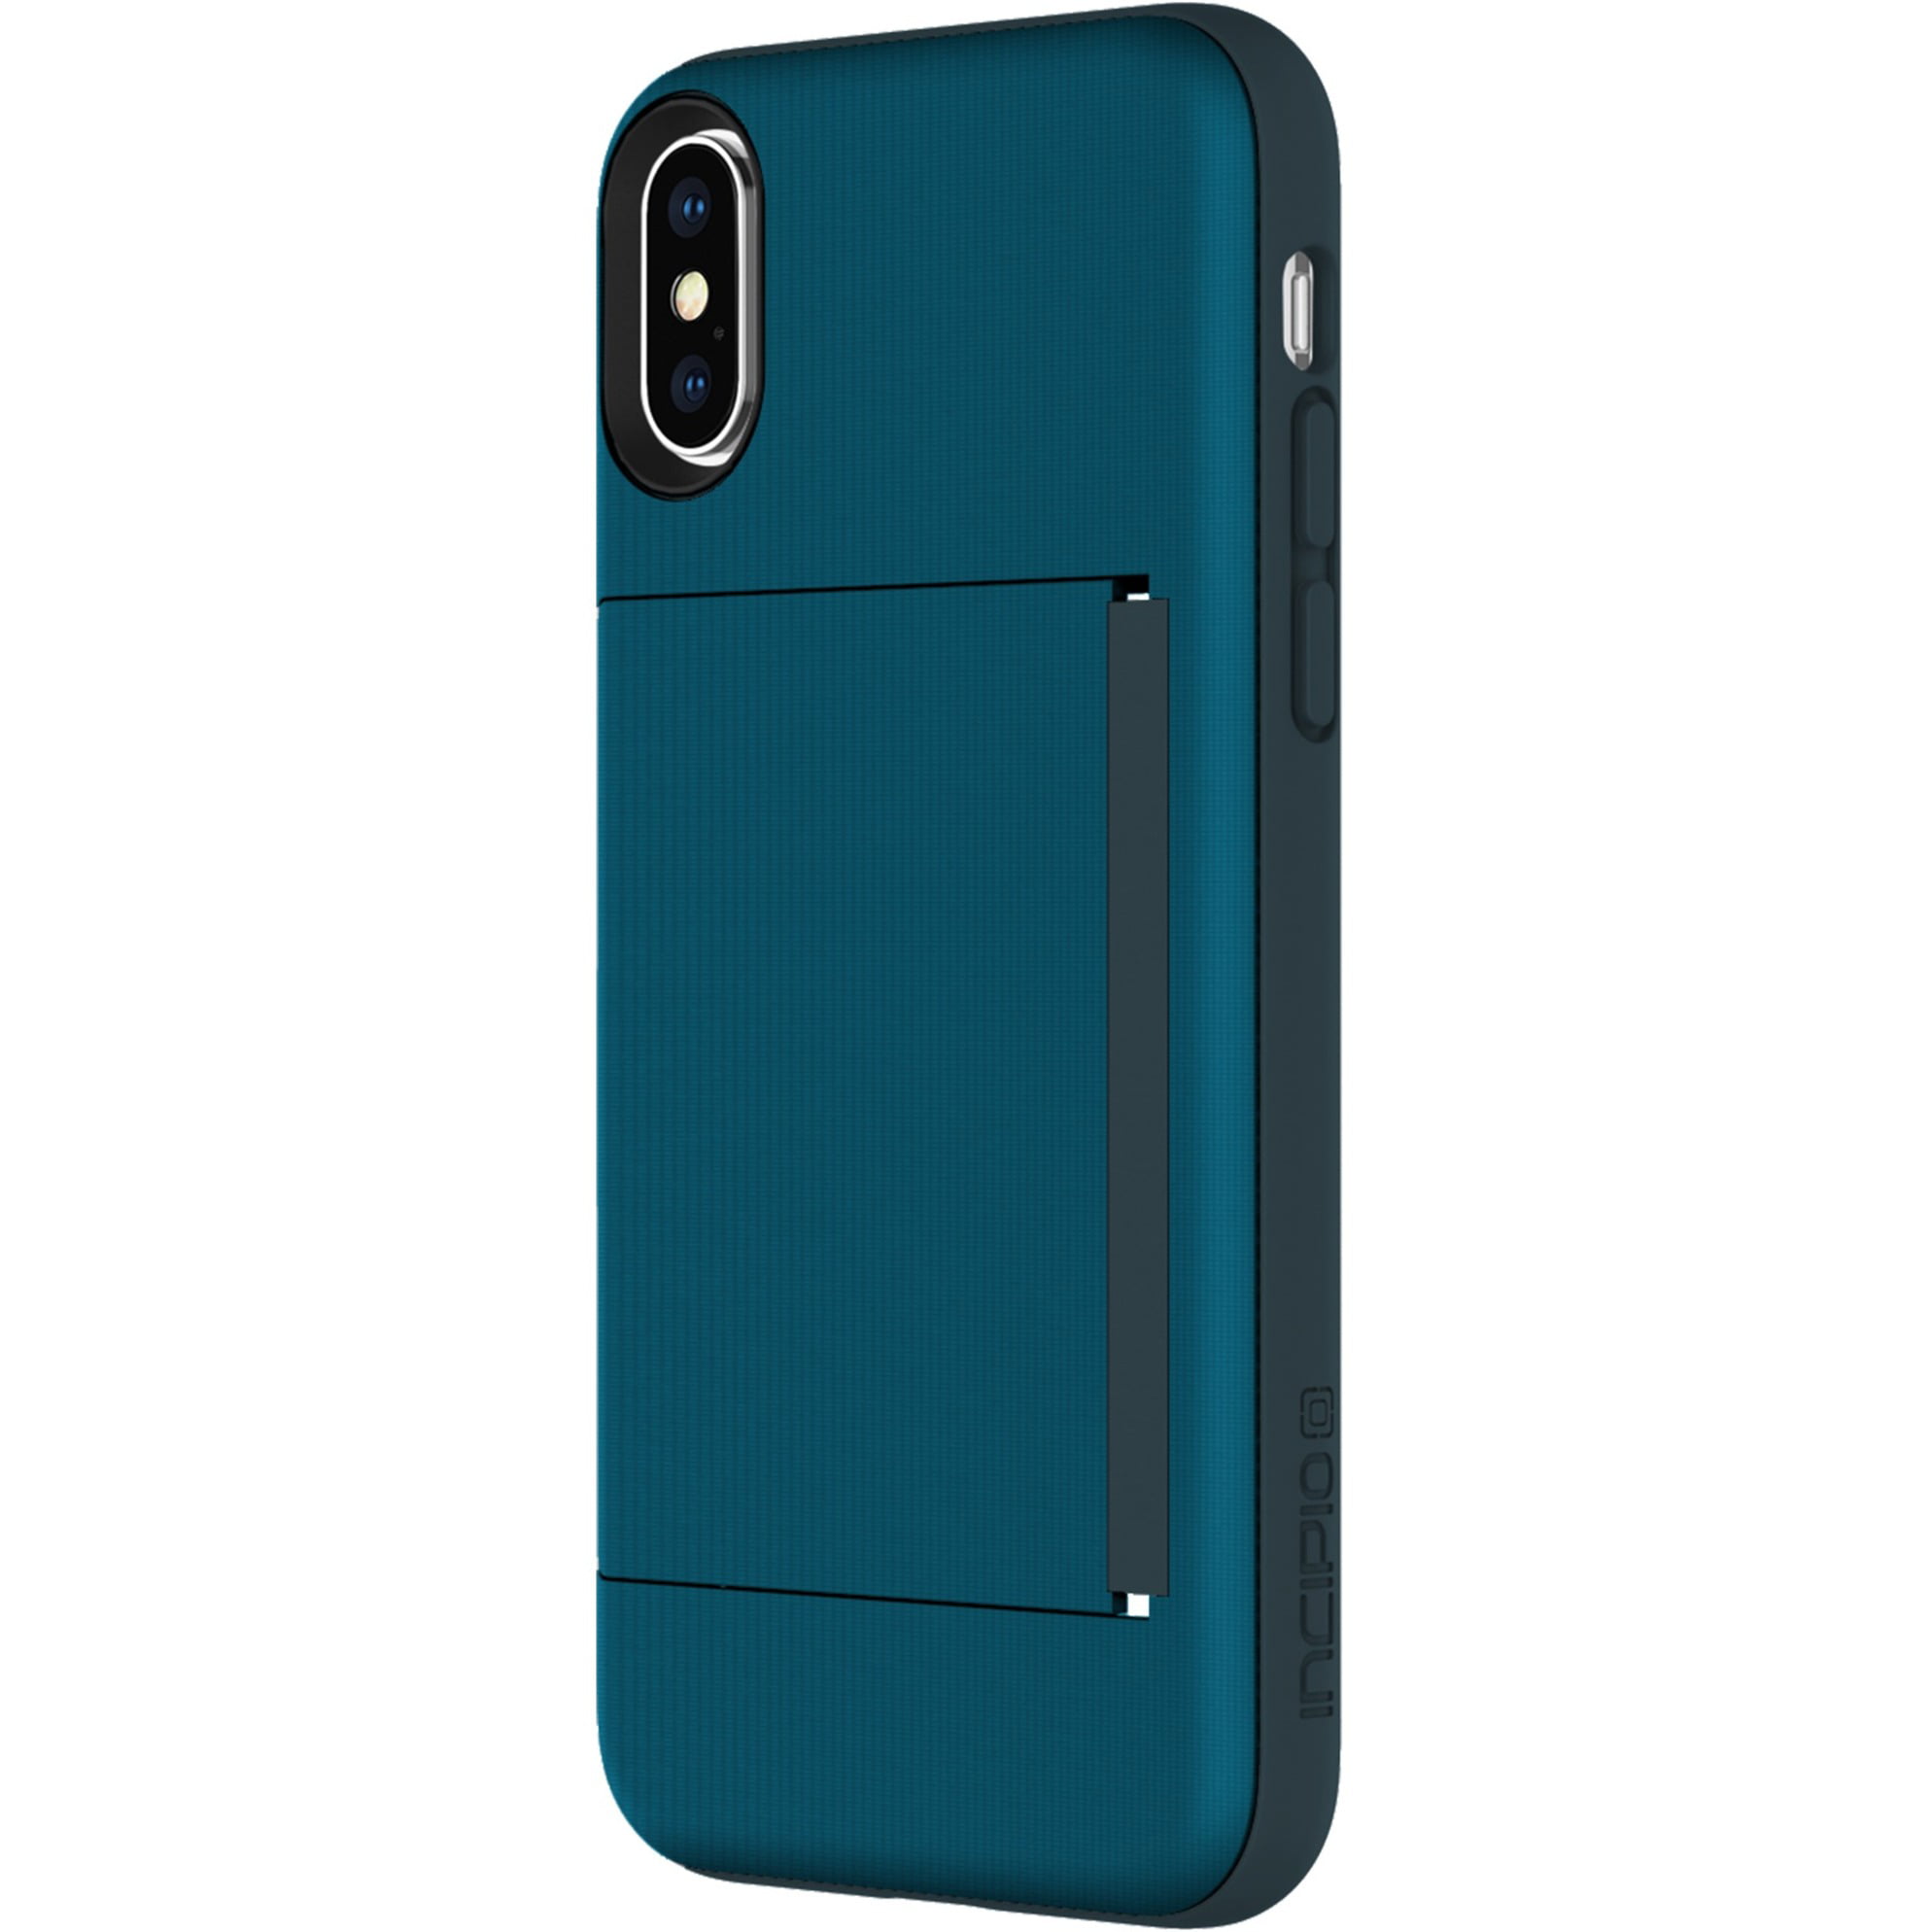 Incipio Stowaway Credit Card Case with Integrated Stand for iPhone X - Walmart.com - Walmart.com